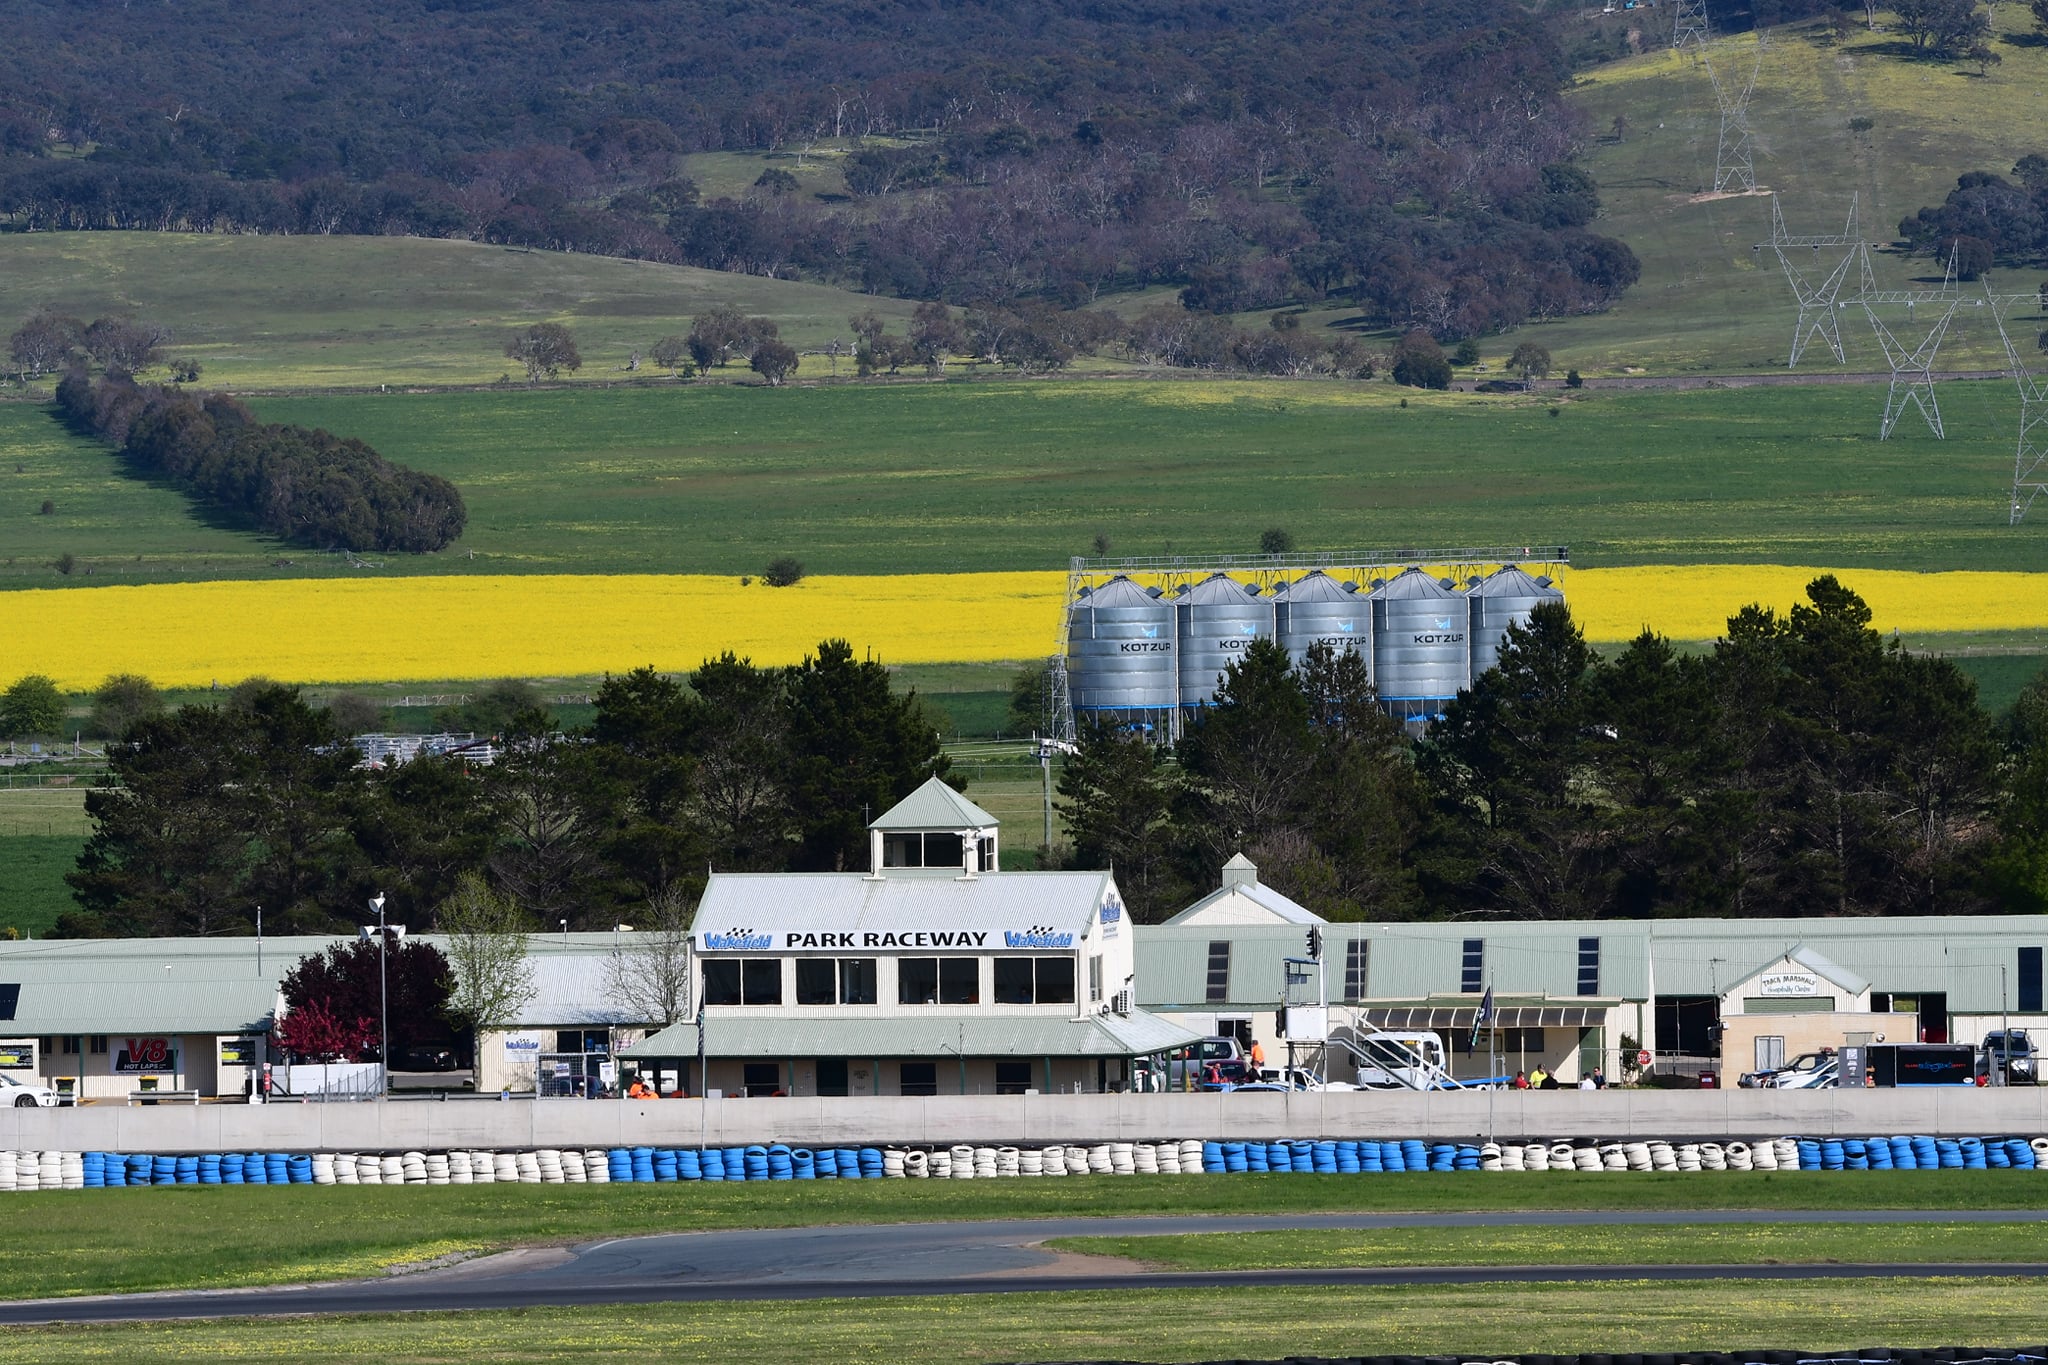 Wakefield Park Raceway takes Goulburn Mulwaree Council to court over expansion